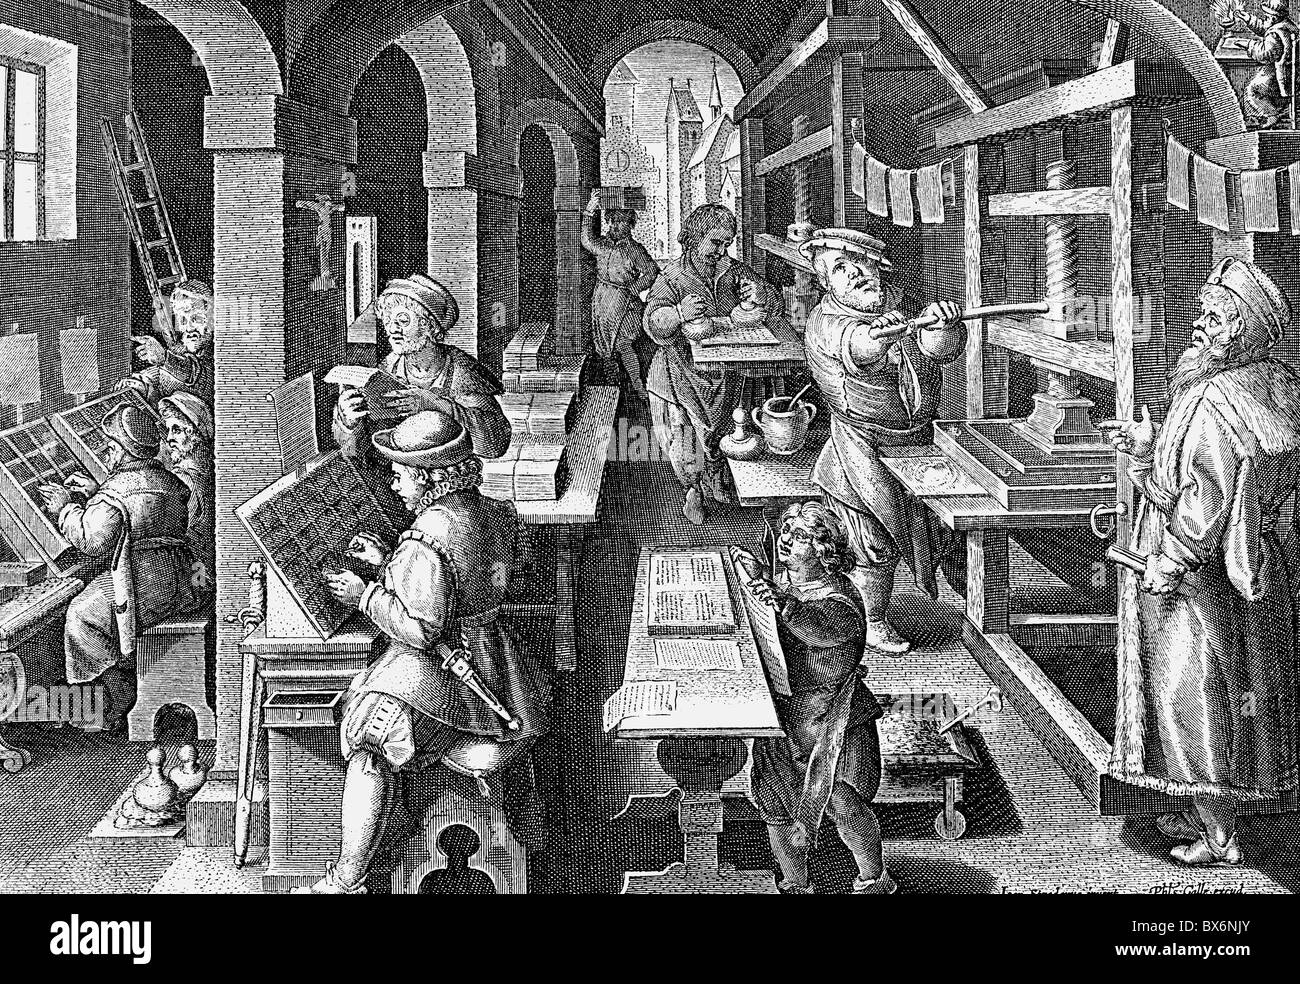 industry, printshop, copper engraving by Theodor Galle after Johannes Stradanus, Netherlands, late 16th century, technics, printing, press, shop, people, professions, master, journeymen, apprentice, printer, typesetter, books, handcraft, craftsmen, historic, historical, Artist's Copyright has not to be cleared Stock Photo